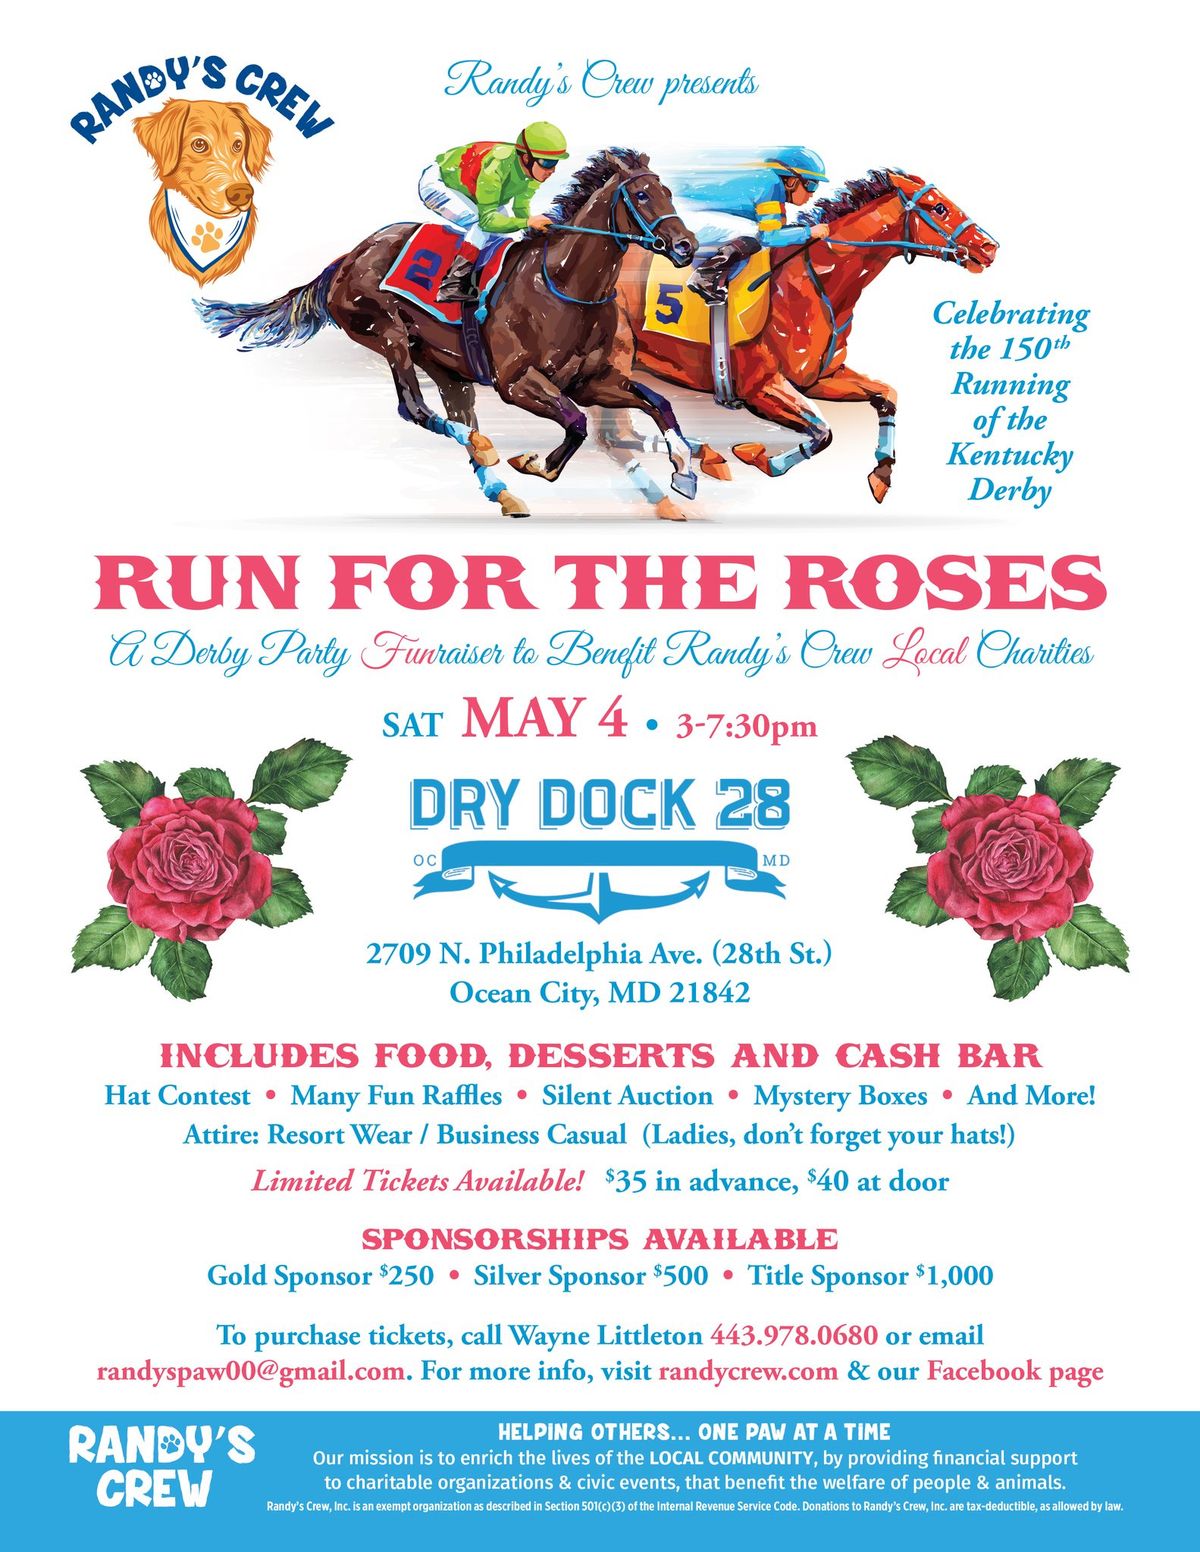 Run for the roses